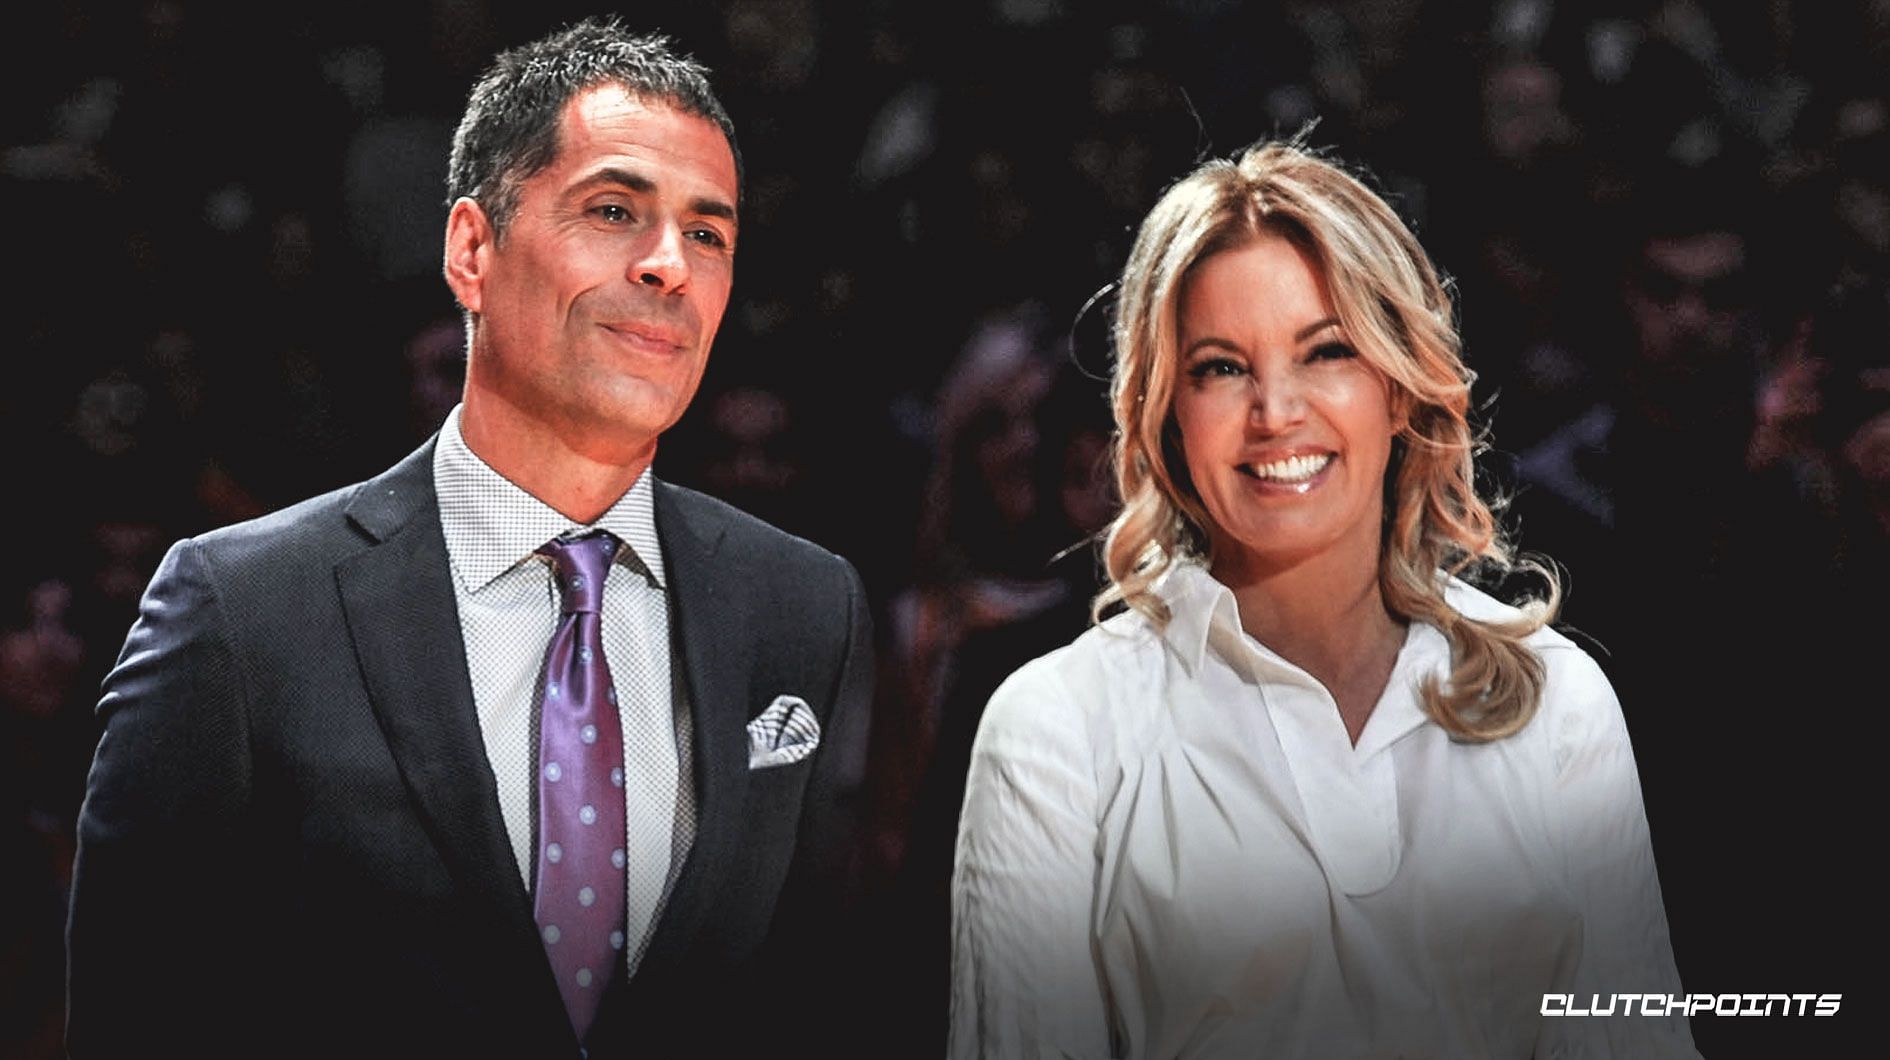 Rob Pelinka and Jeanie Buss: The LA Lakers front office